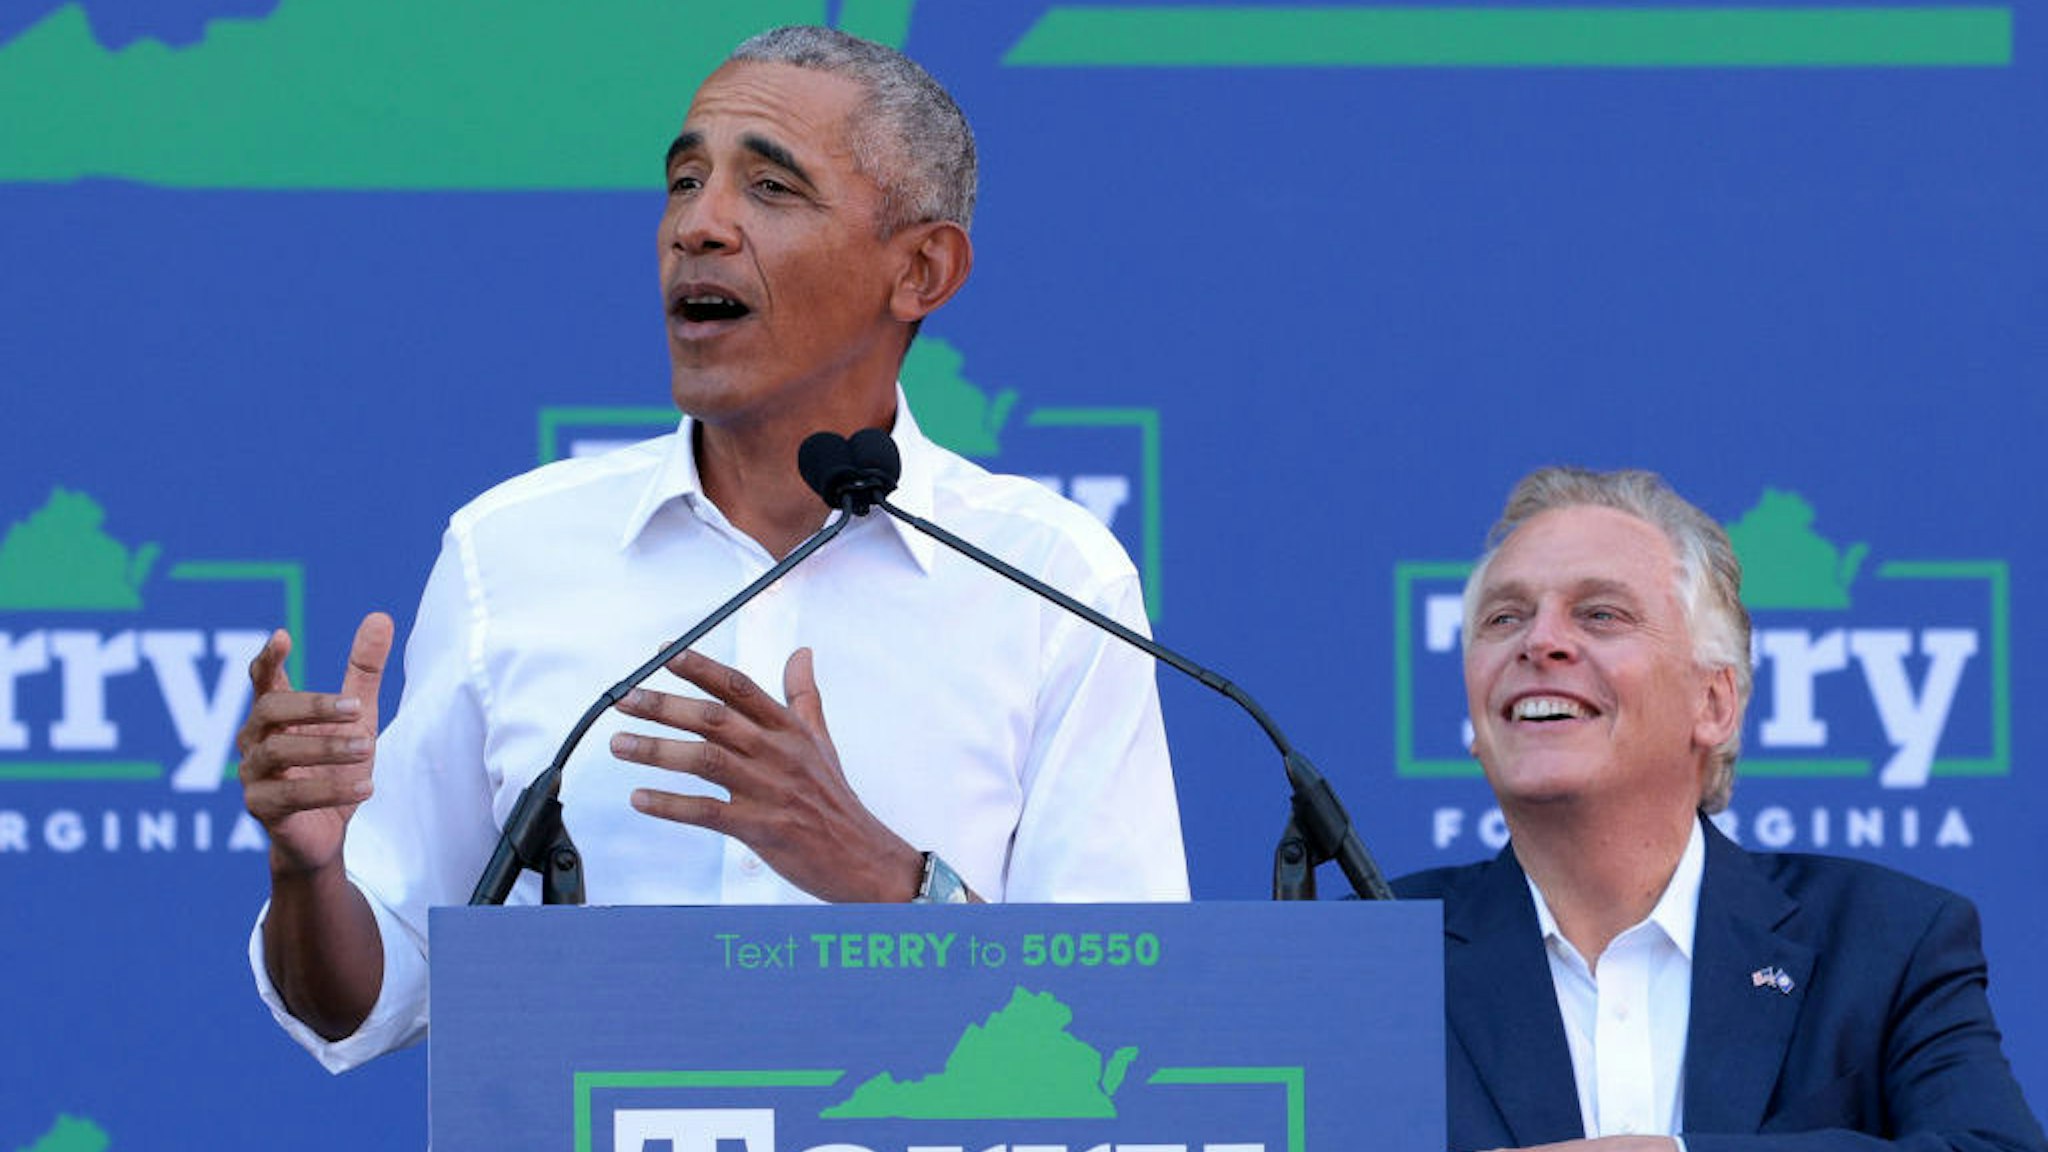 RICHMOND, VIRGINIA - OCTOBER 23: Former U.S. President Barack Obama (L) speaks as he campaigns with Democratic gubernatorial candidate, former Virginia Gov. Terry McAuliffe at Virginia Commonwealth University October 23, 2021 in Richmond, Virginia. The Virginia gubernatorial election, pitting McAuliffe against Republican candidate Glenn Youngkin, is November 2. (Photo by Win McNamee/Getty Images)